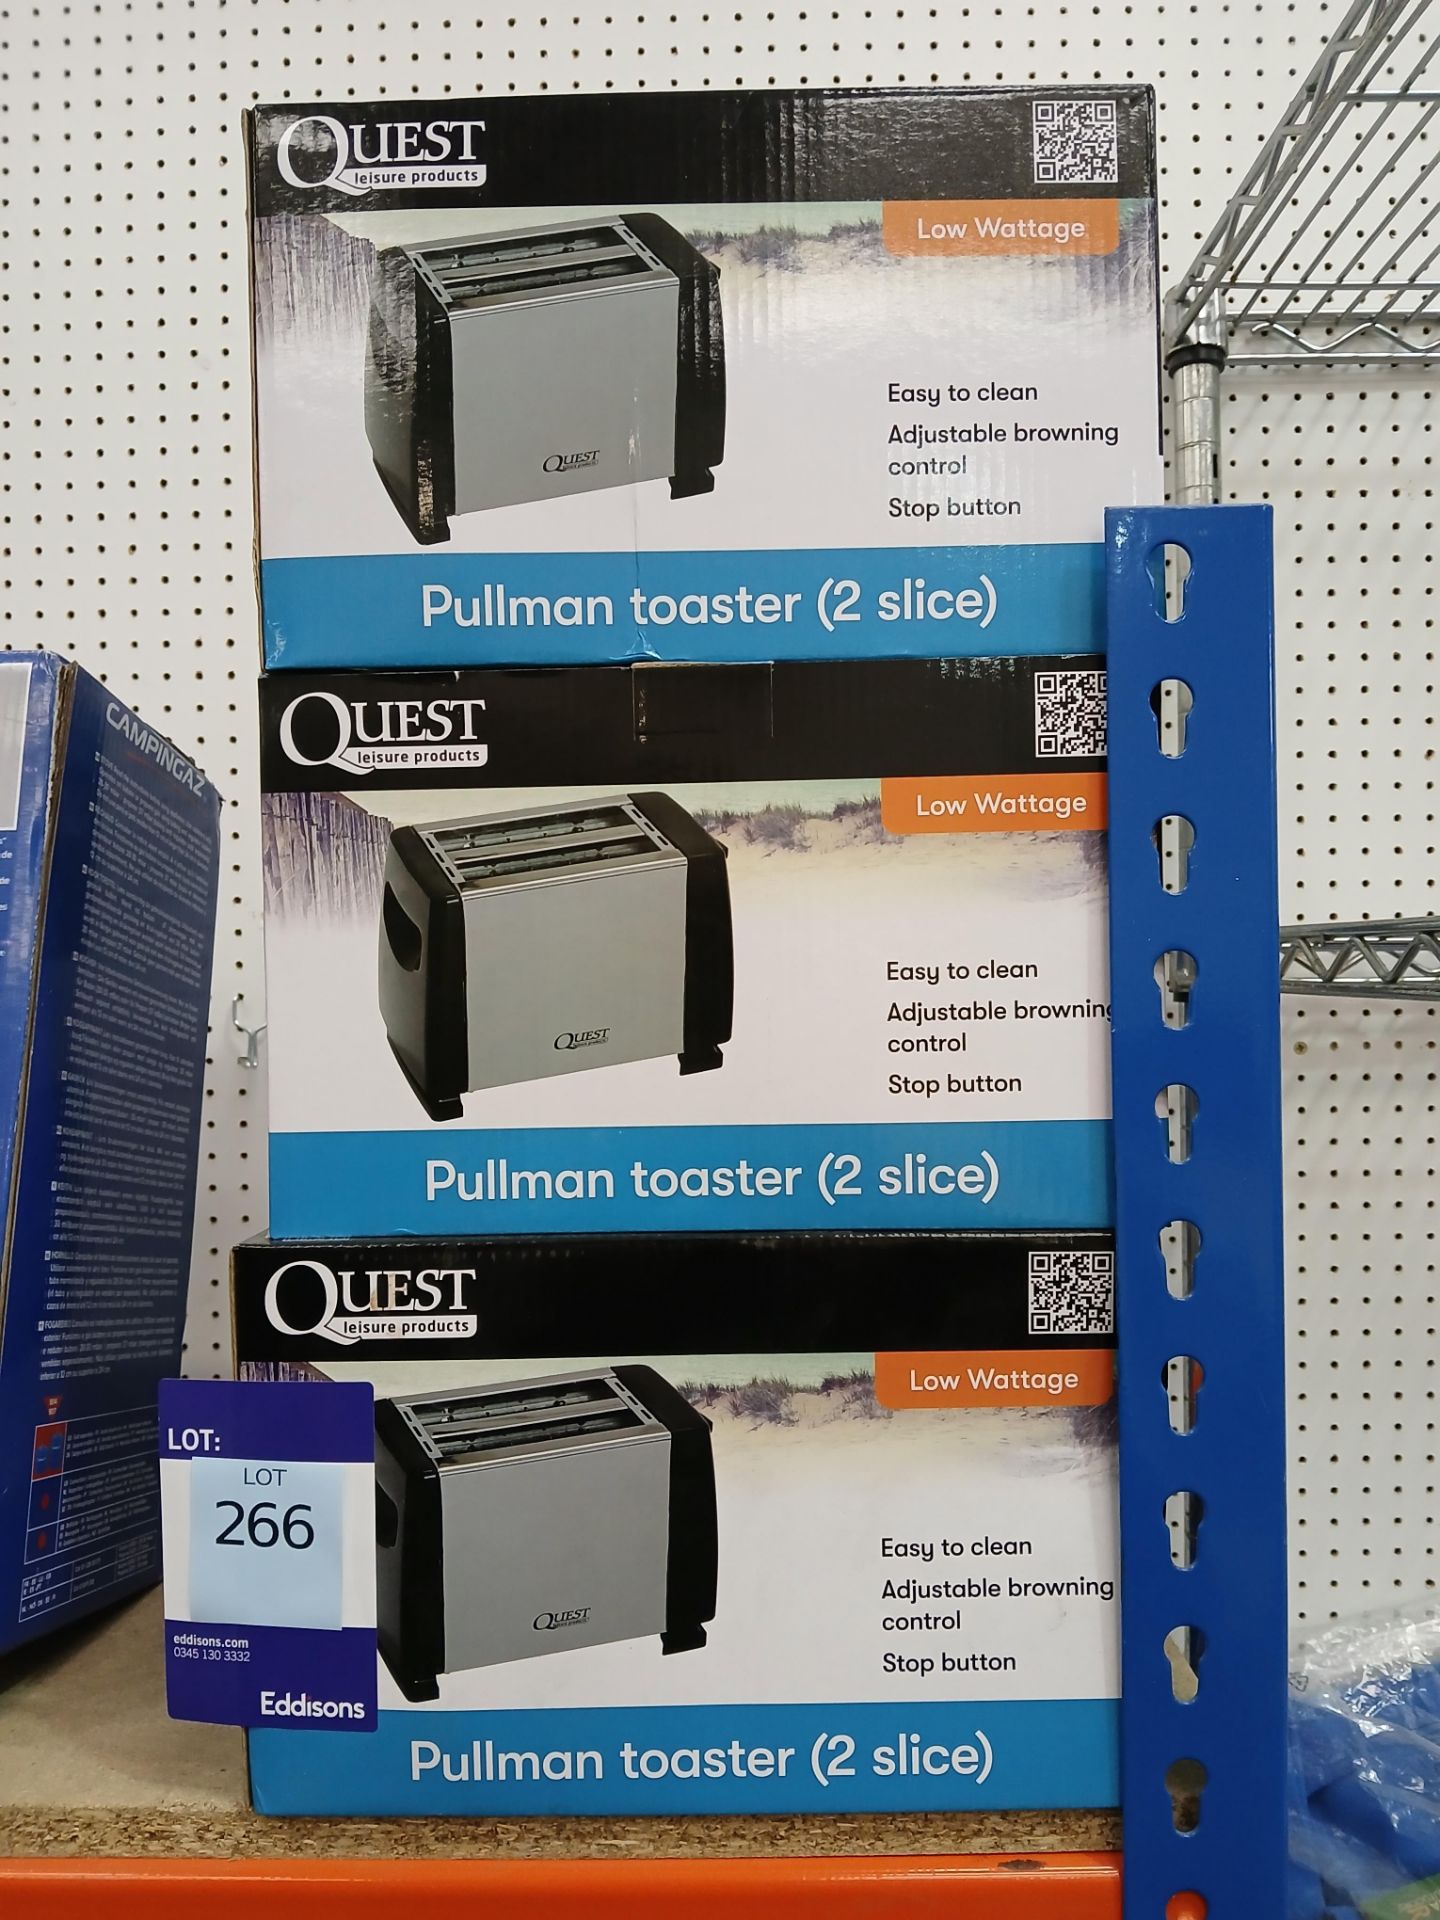 6 x Quest Pullman Toaster (Please note, Viewing Strongly Recommended - Eddisons have not inspected